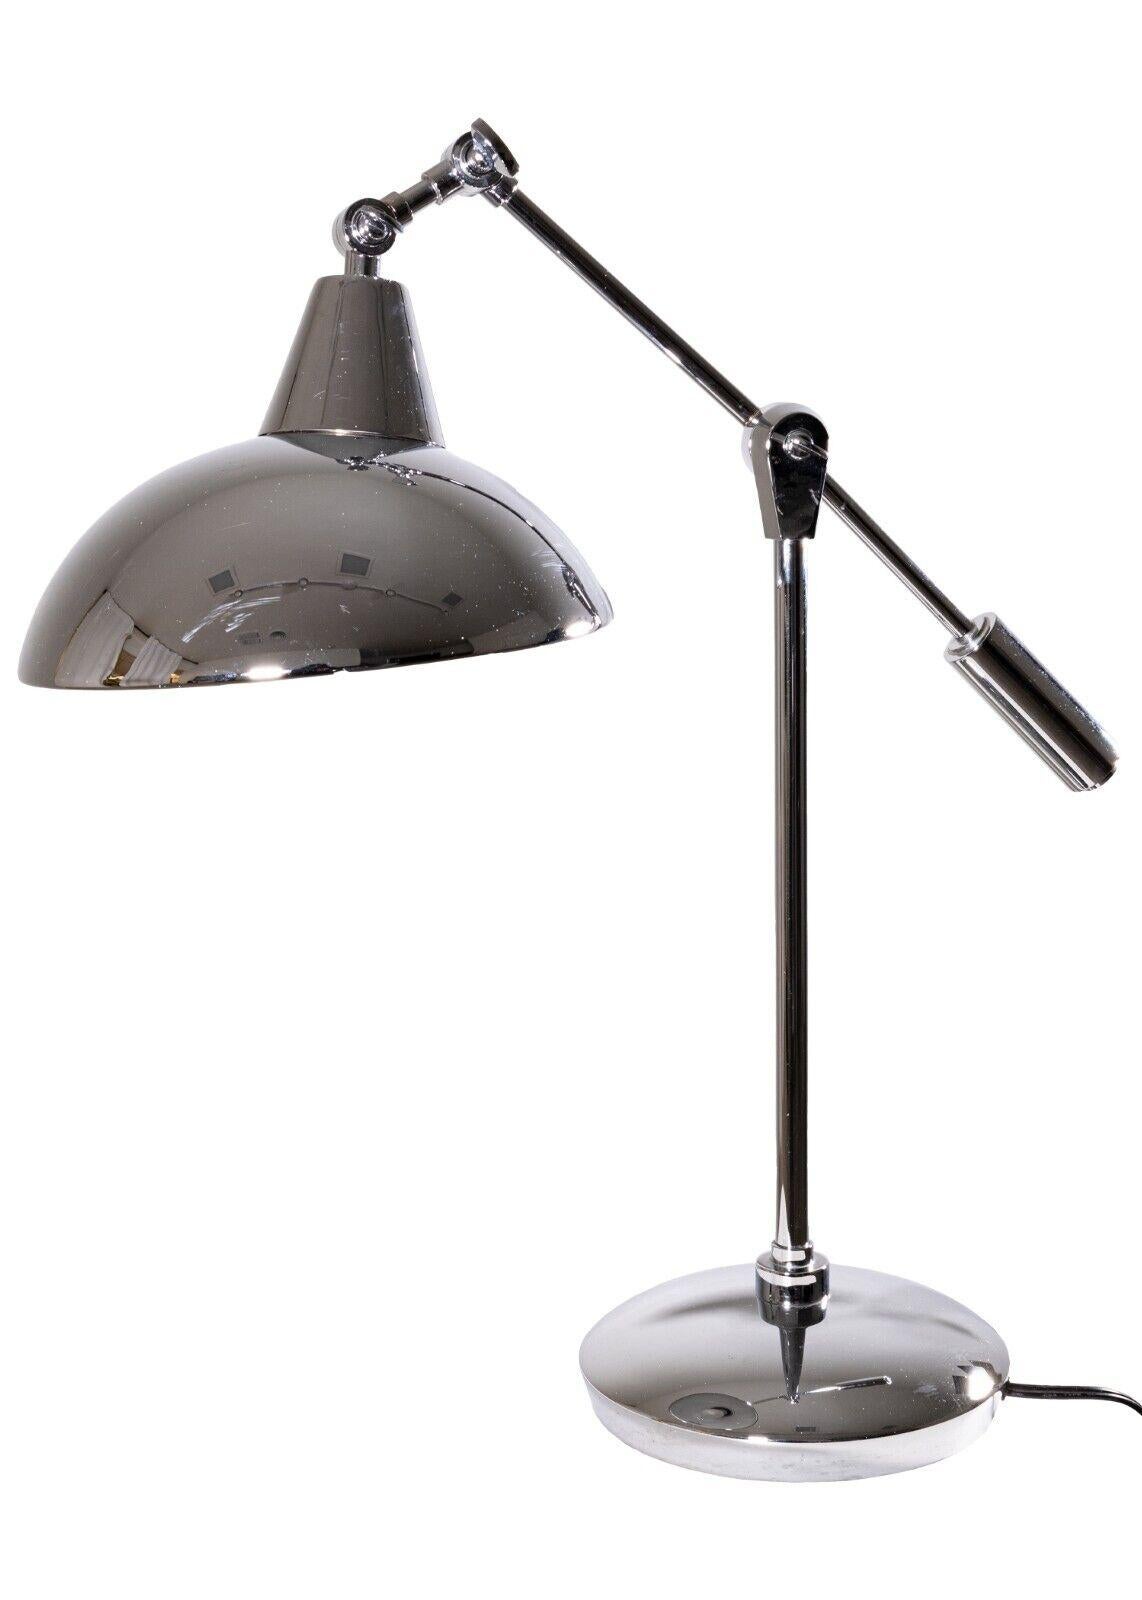 A pair of polished chrome articulating table lamps. A very sophisticated pair of lamps, perfect for a modern home. These lamps are finished head to toe in a very reflective polished chrome. The chrome is in great condition, but it does have